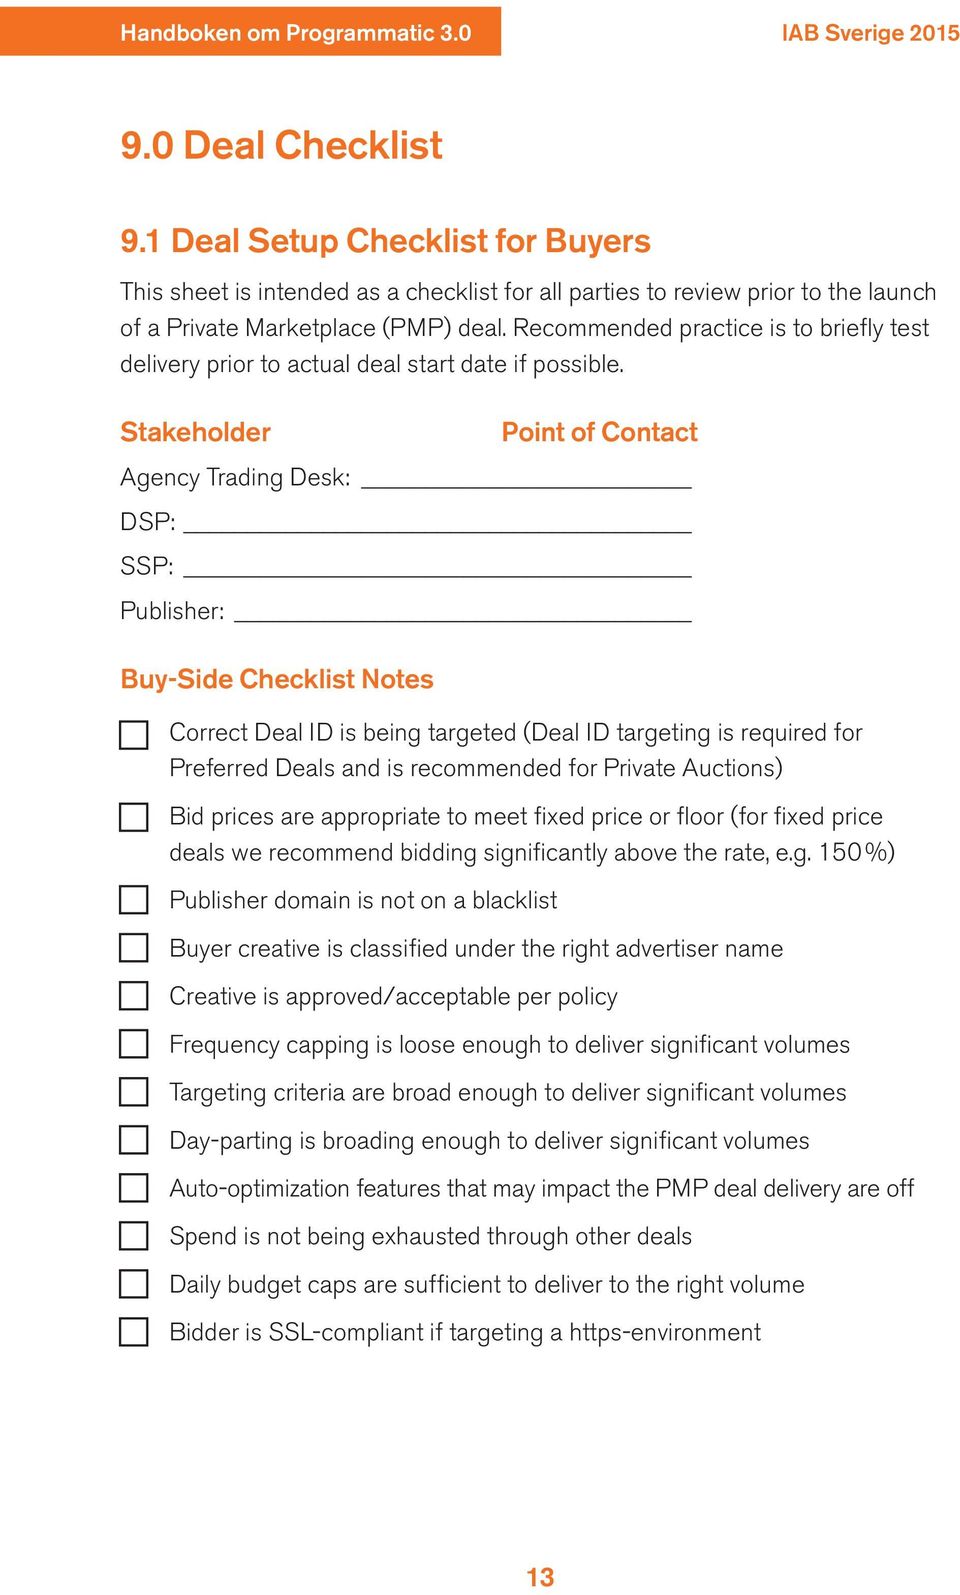 Stakeholder Point of Contact Agency Trading Desk: DSP: SSP: Publisher: Buy-Side Checklist Notes Correct Deal ID is being targeted (Deal ID targeting is required for Preferred Deals and is recommended